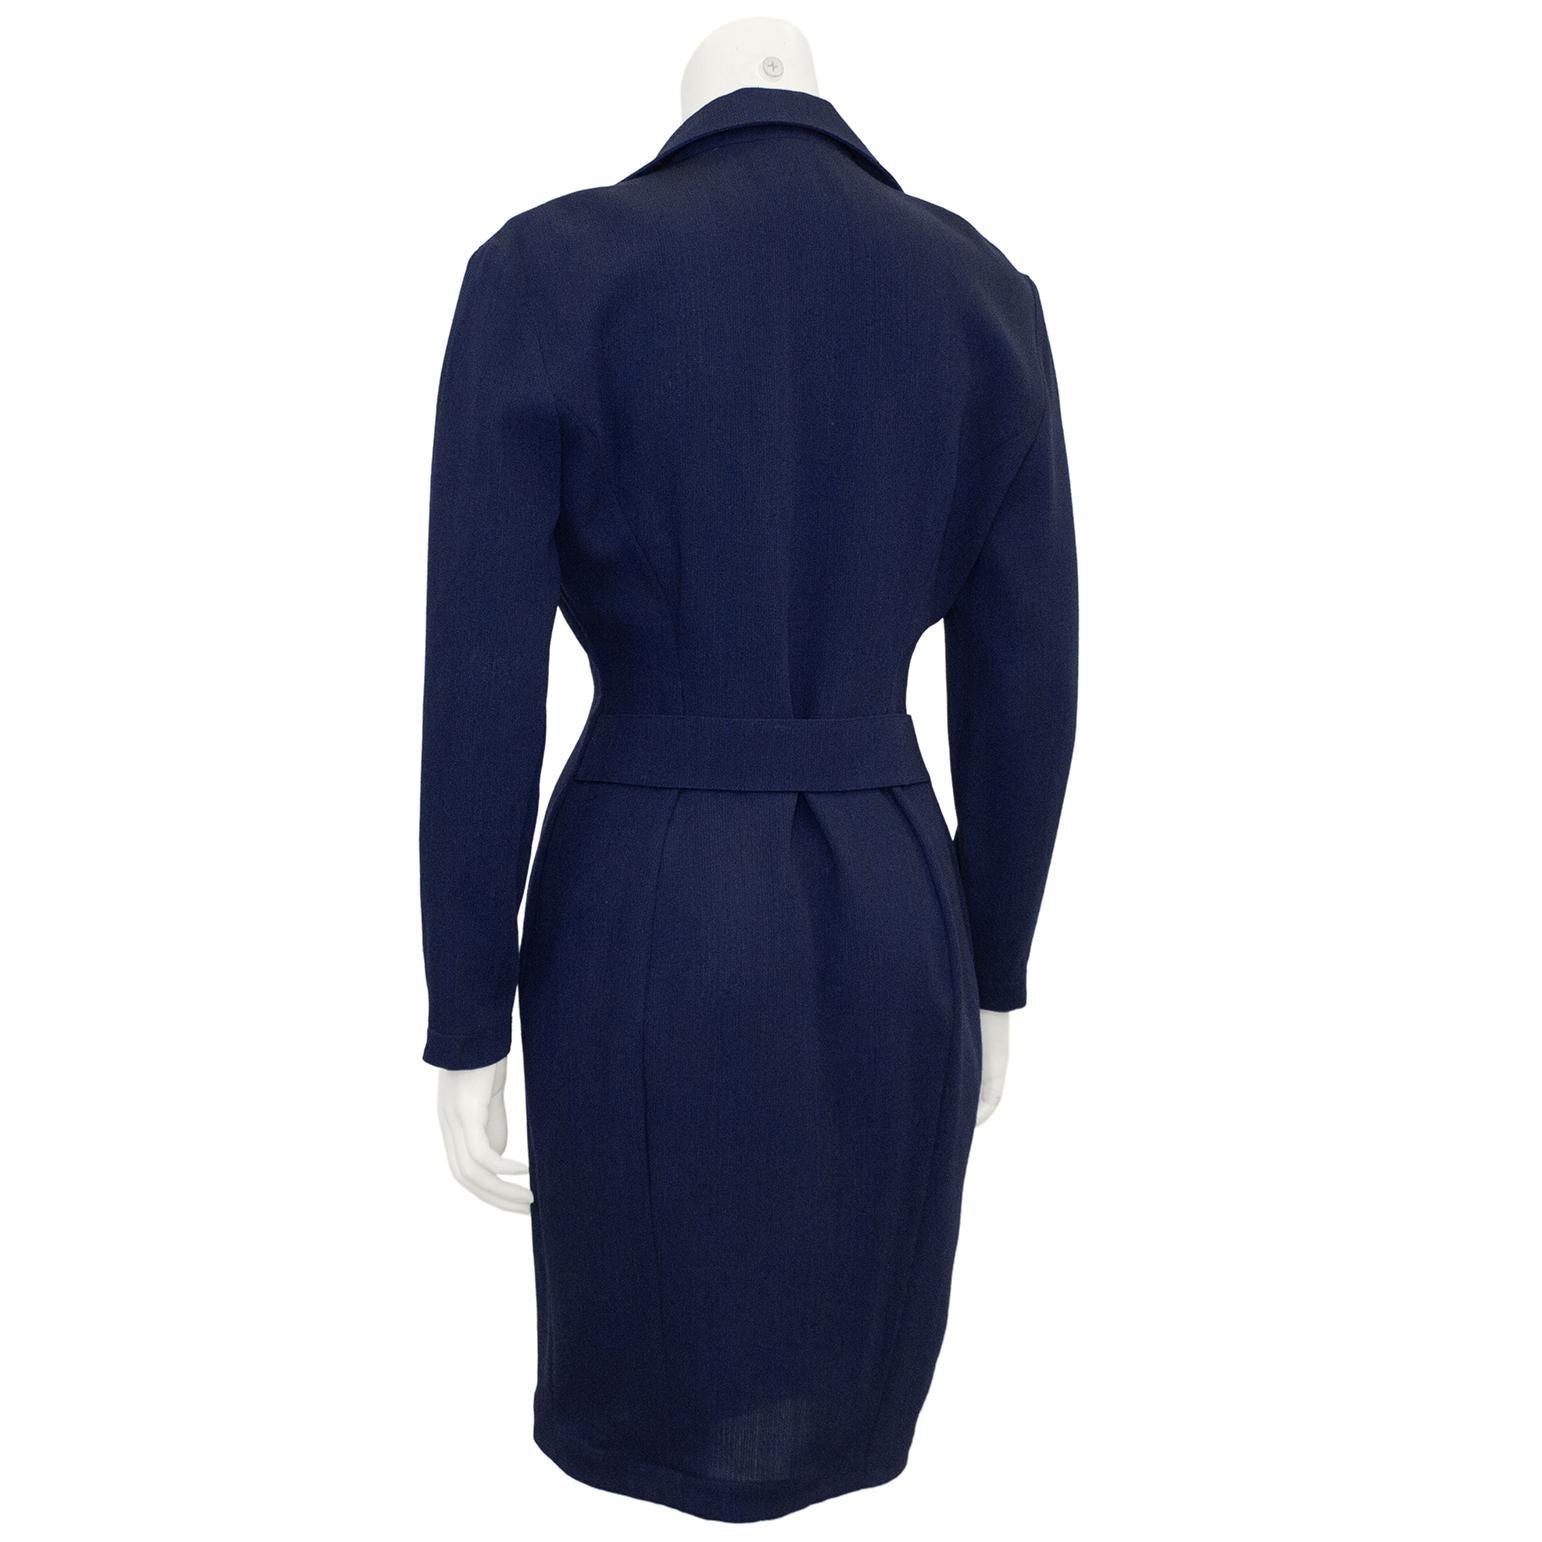 Late 1980s Thierry Mugler Navy Wool Double Breasted Coat Dress In Good Condition For Sale In Toronto, Ontario